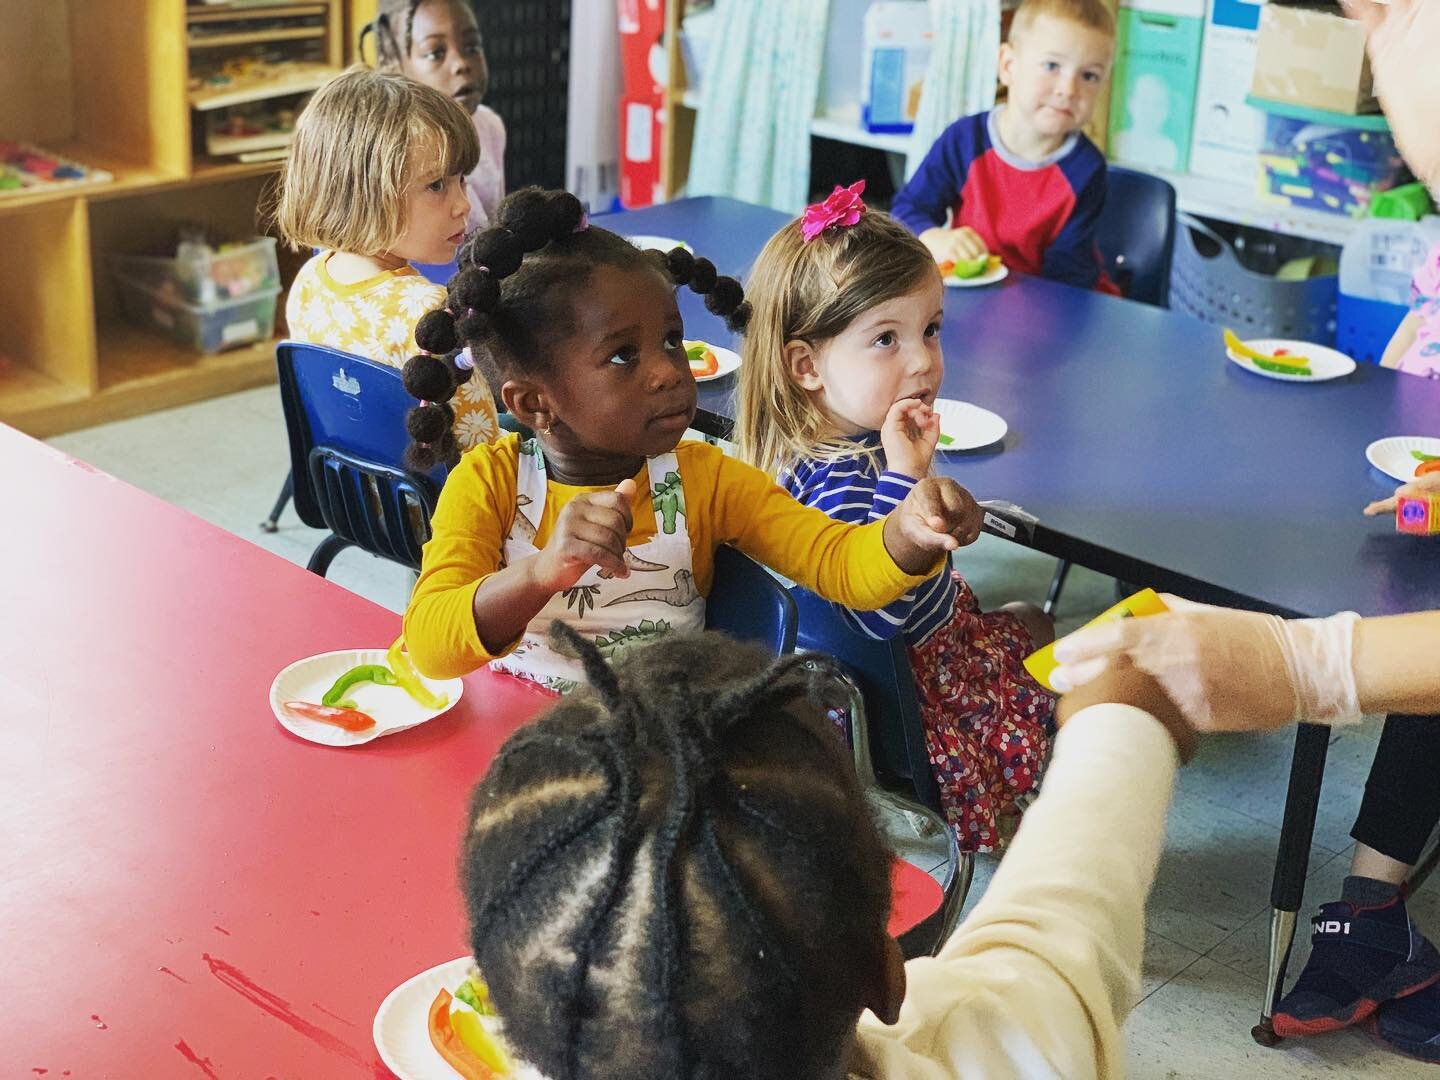 We got more partners in the building! 

Jane from #SnapEd visited us for their #EatWellPlayHard in child care settings program. A 6 week program of stories, snacks and physical activity. Starting healthy behaviors early and promoting food exploration